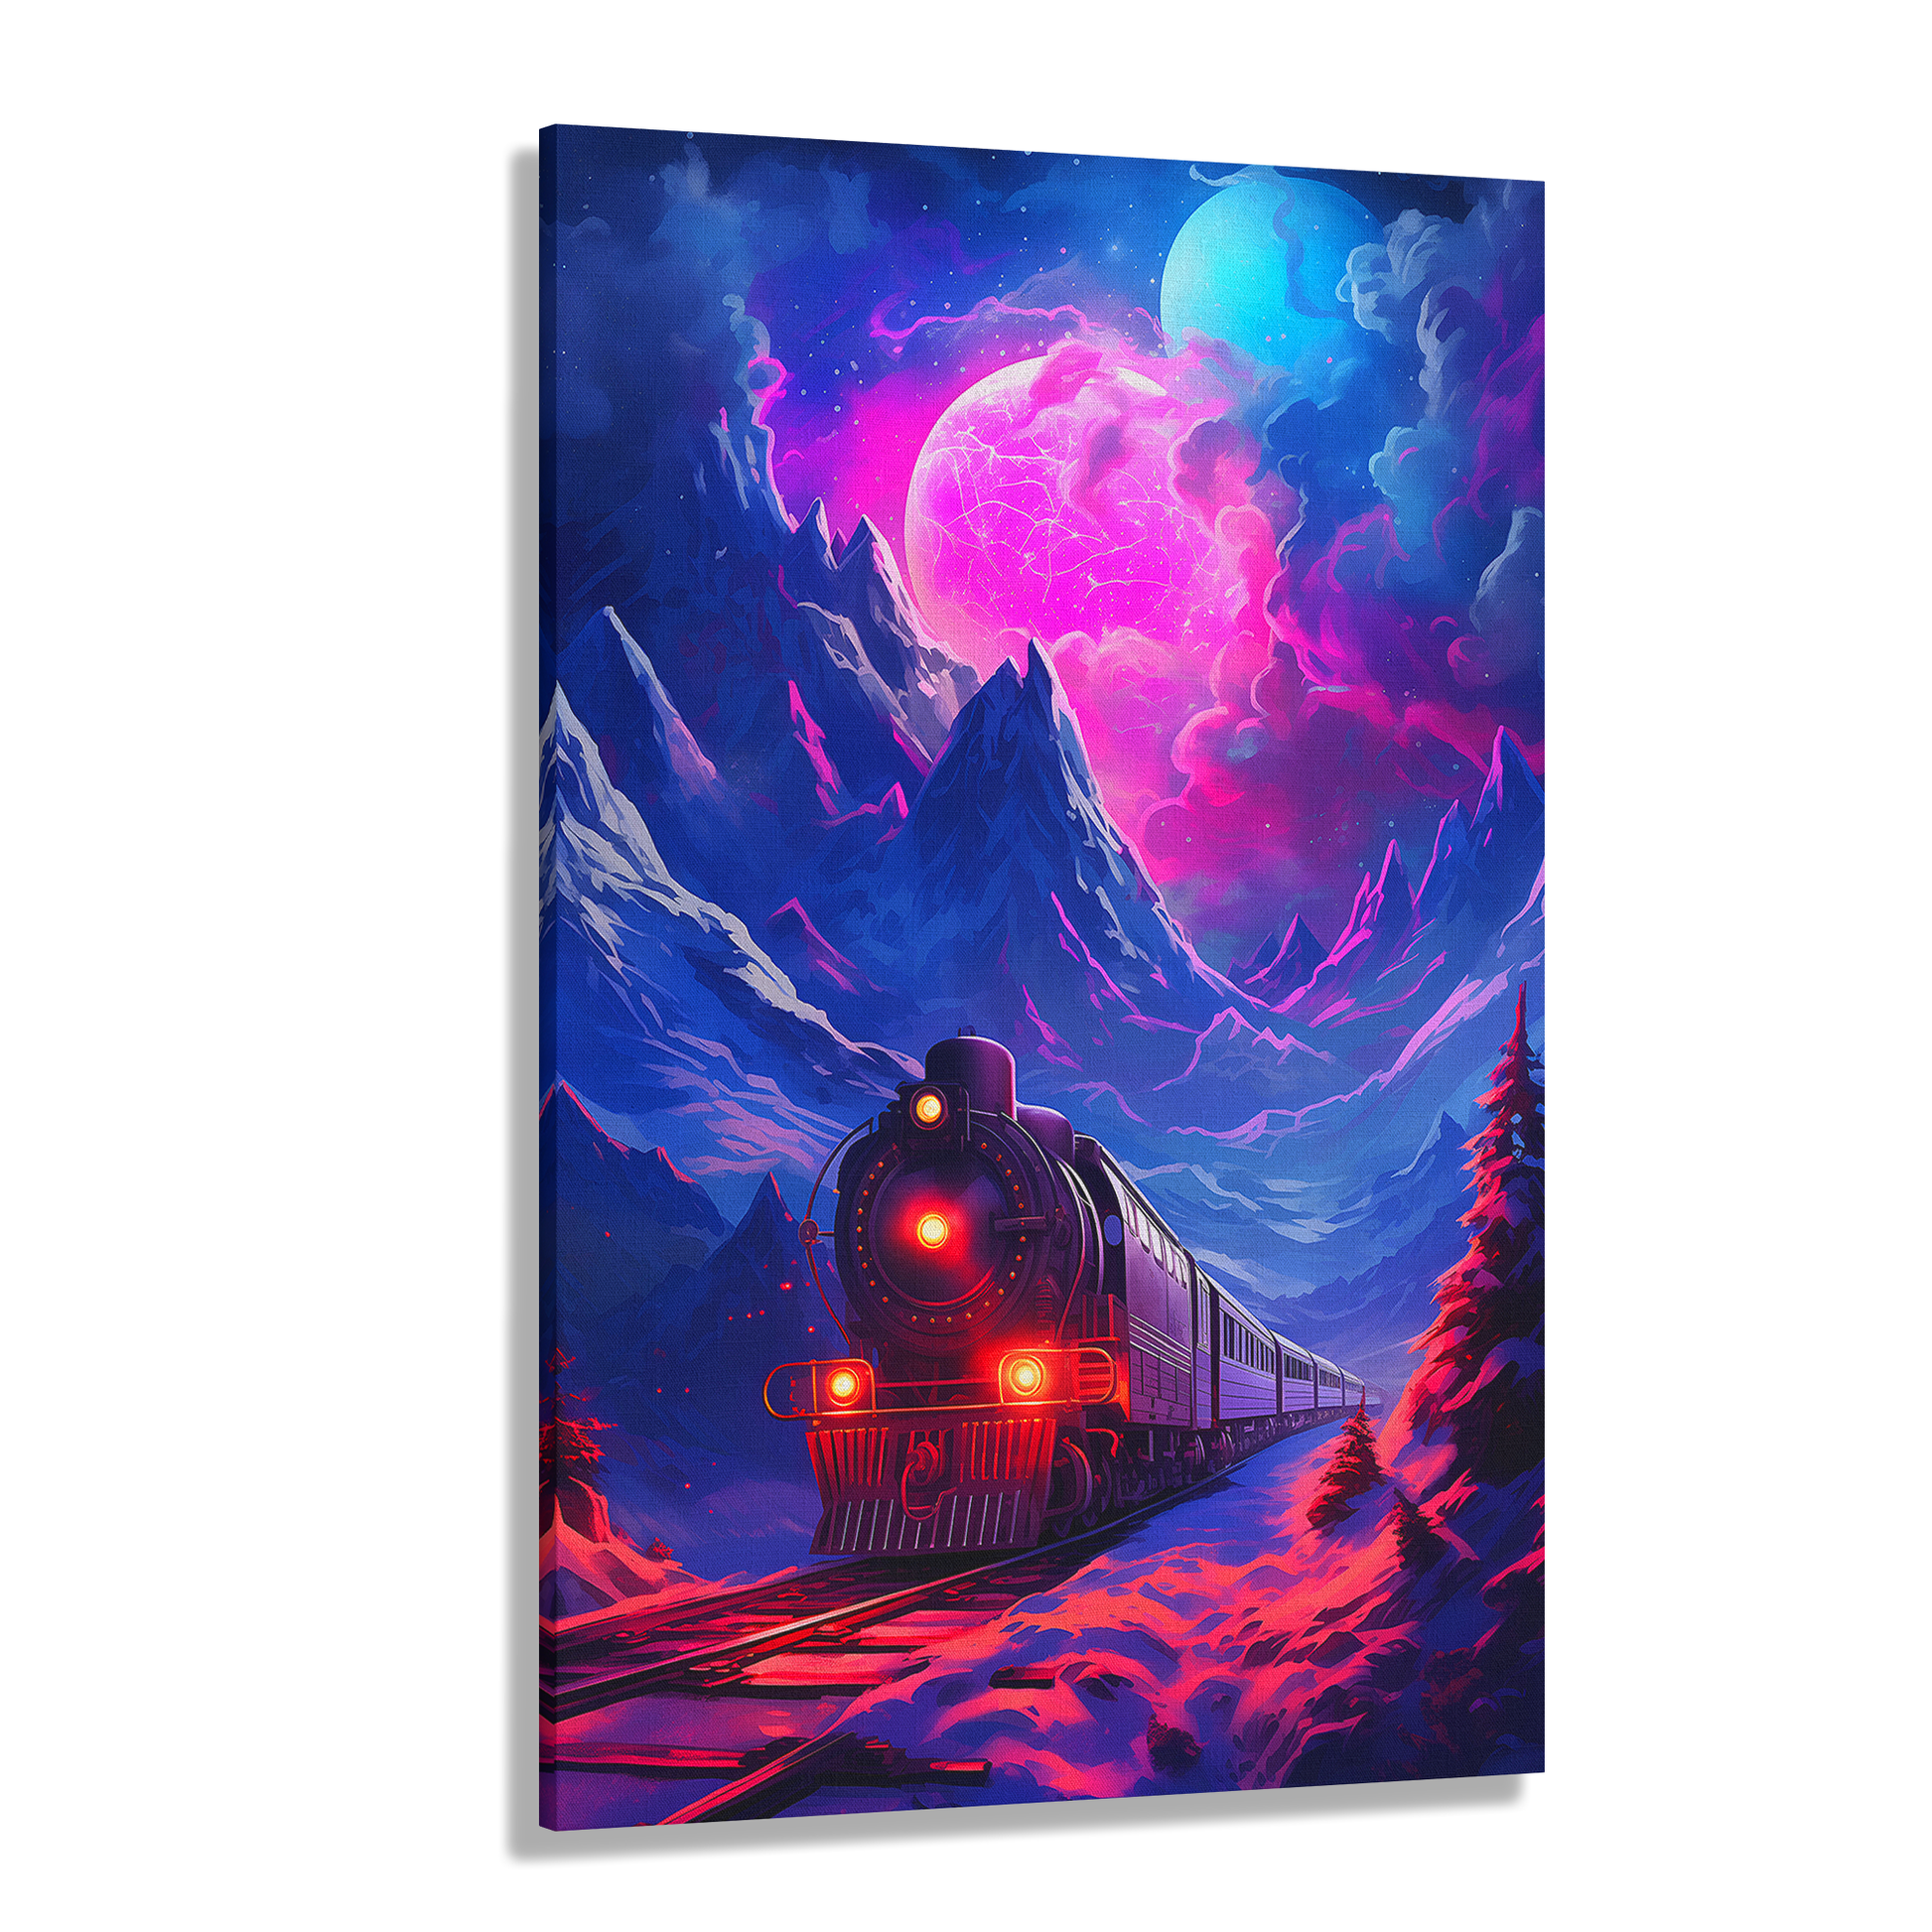 Polar Express Luminescence (Canvas)Polar Express Luminescence (Canvas  Matte finish, stretched, with a depth of 1.25 inches)
Struggling with low-quality canvases? Switch to RimaGallery! Our canvases aRimaGallery